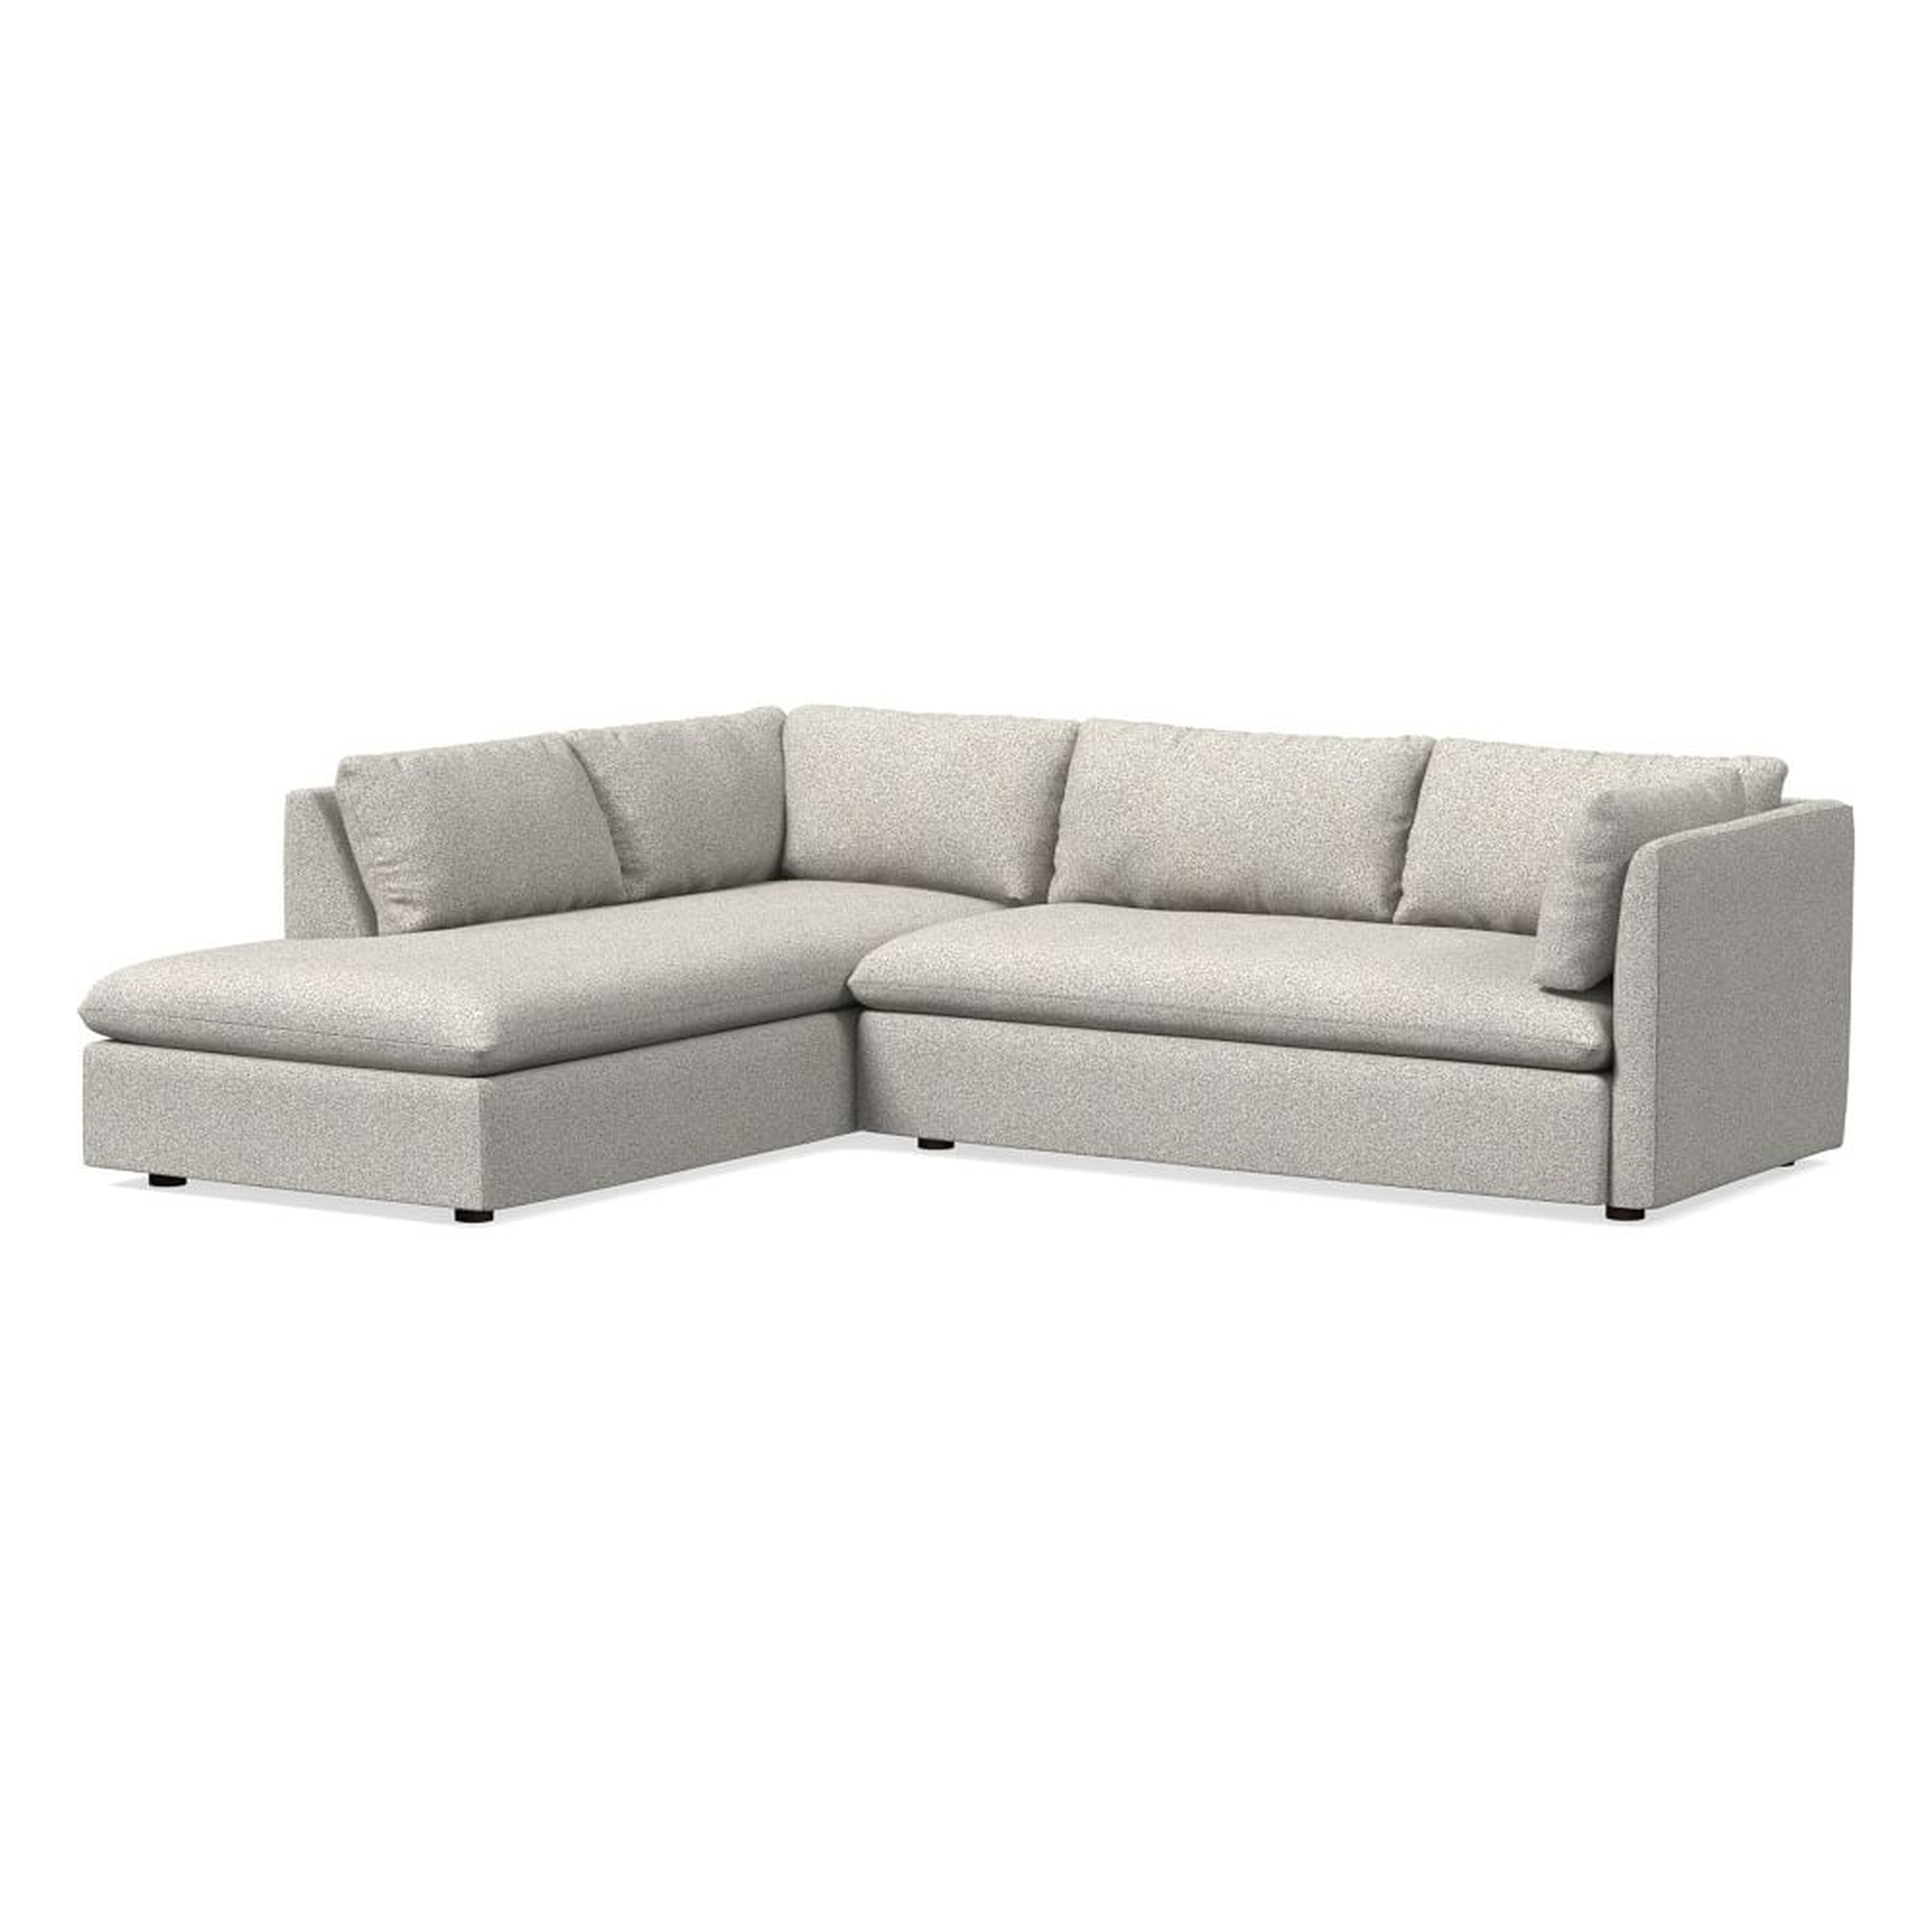 Shelter 106" Left 2-Piece Bumper Chaise Sectional, Chenille Tweed, Storm Gray - West Elm